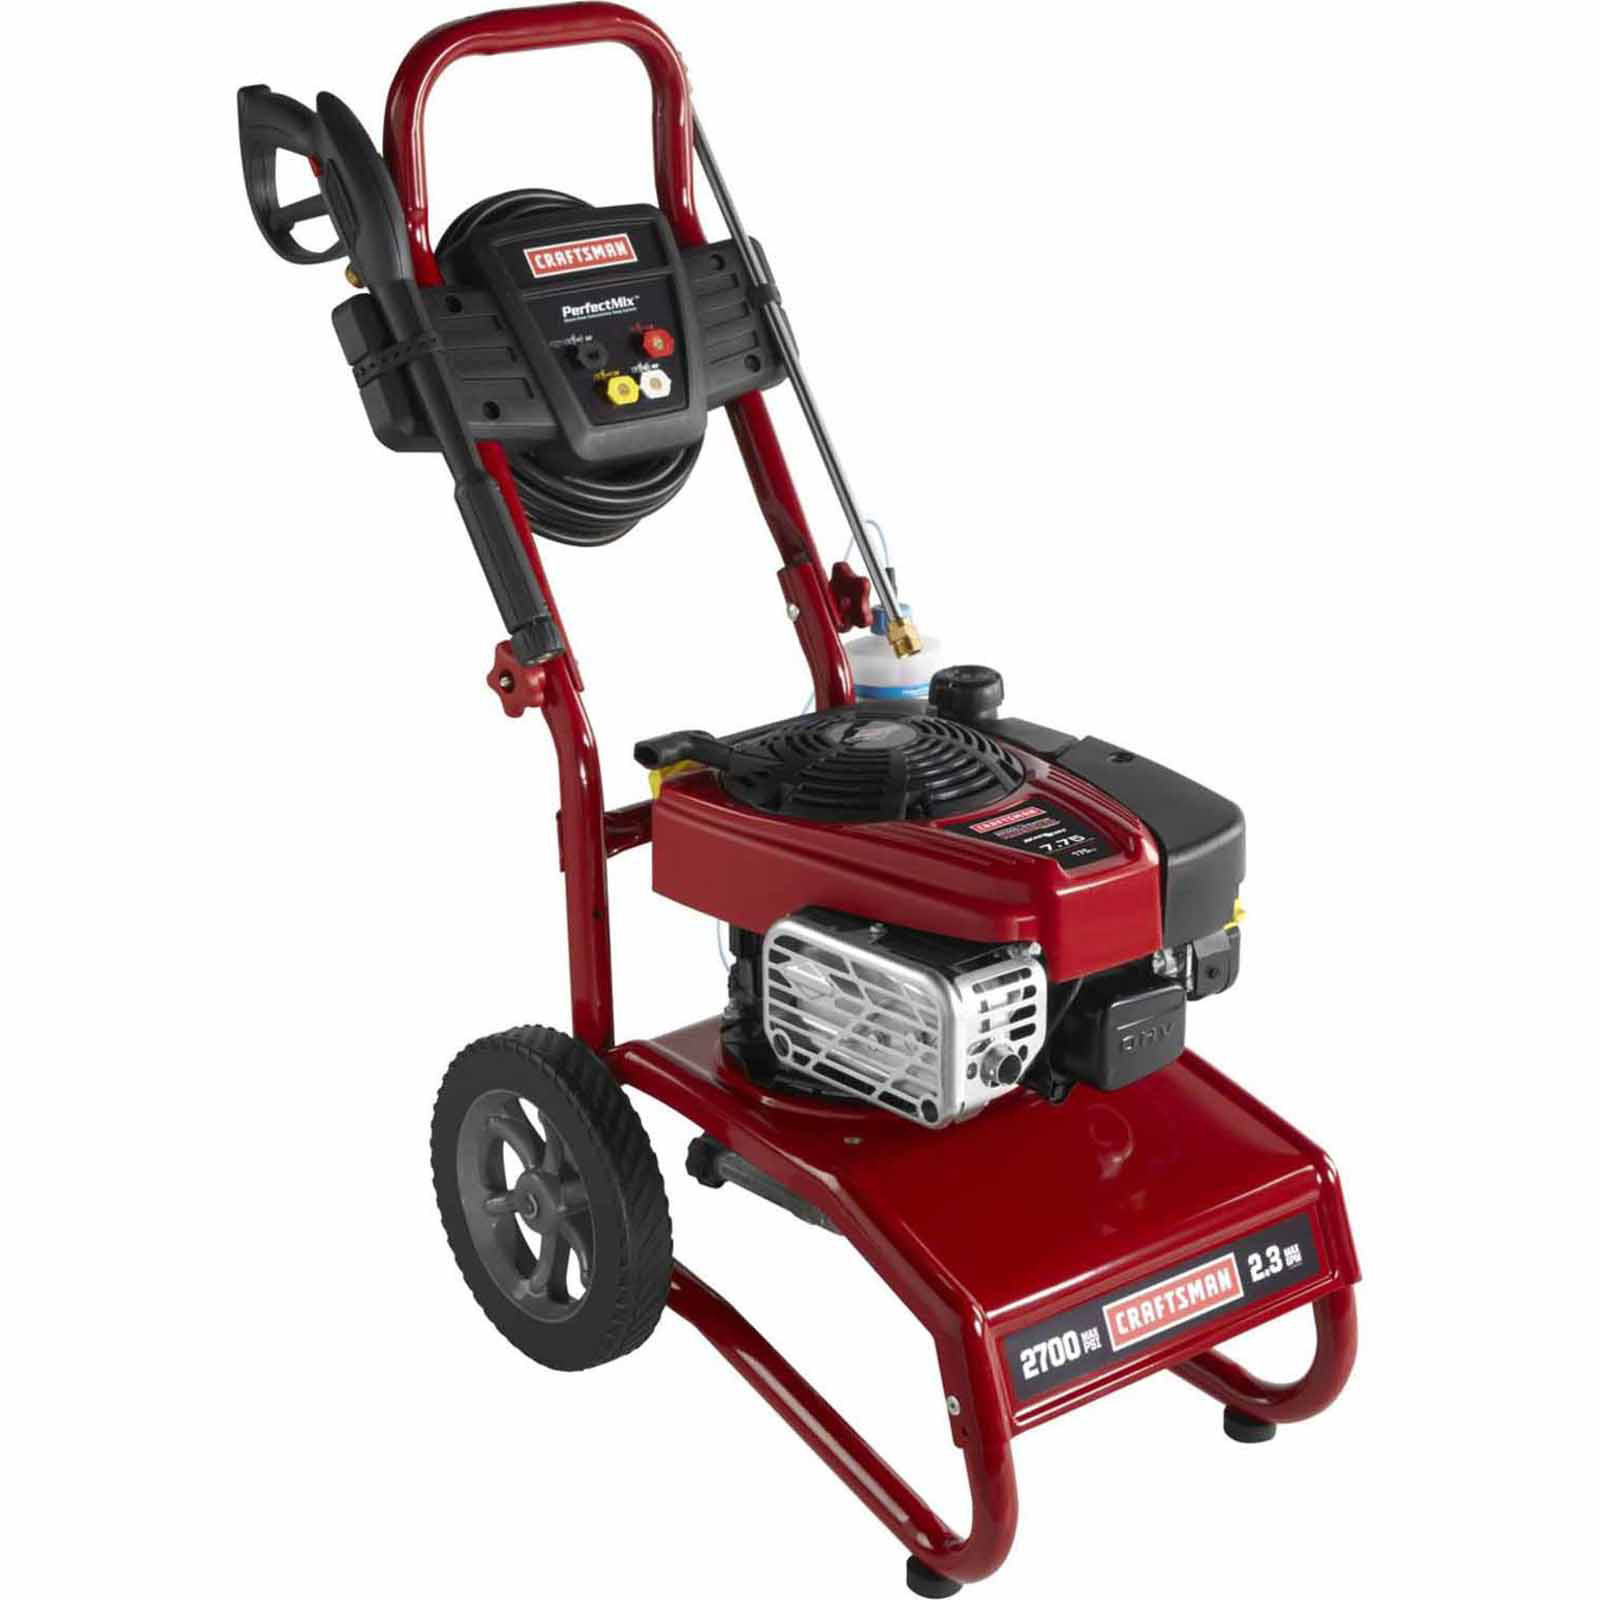 Craftsman 75287 2700PSI 2.3GPM 4-Cycle Gas-Powered Pressure Washer